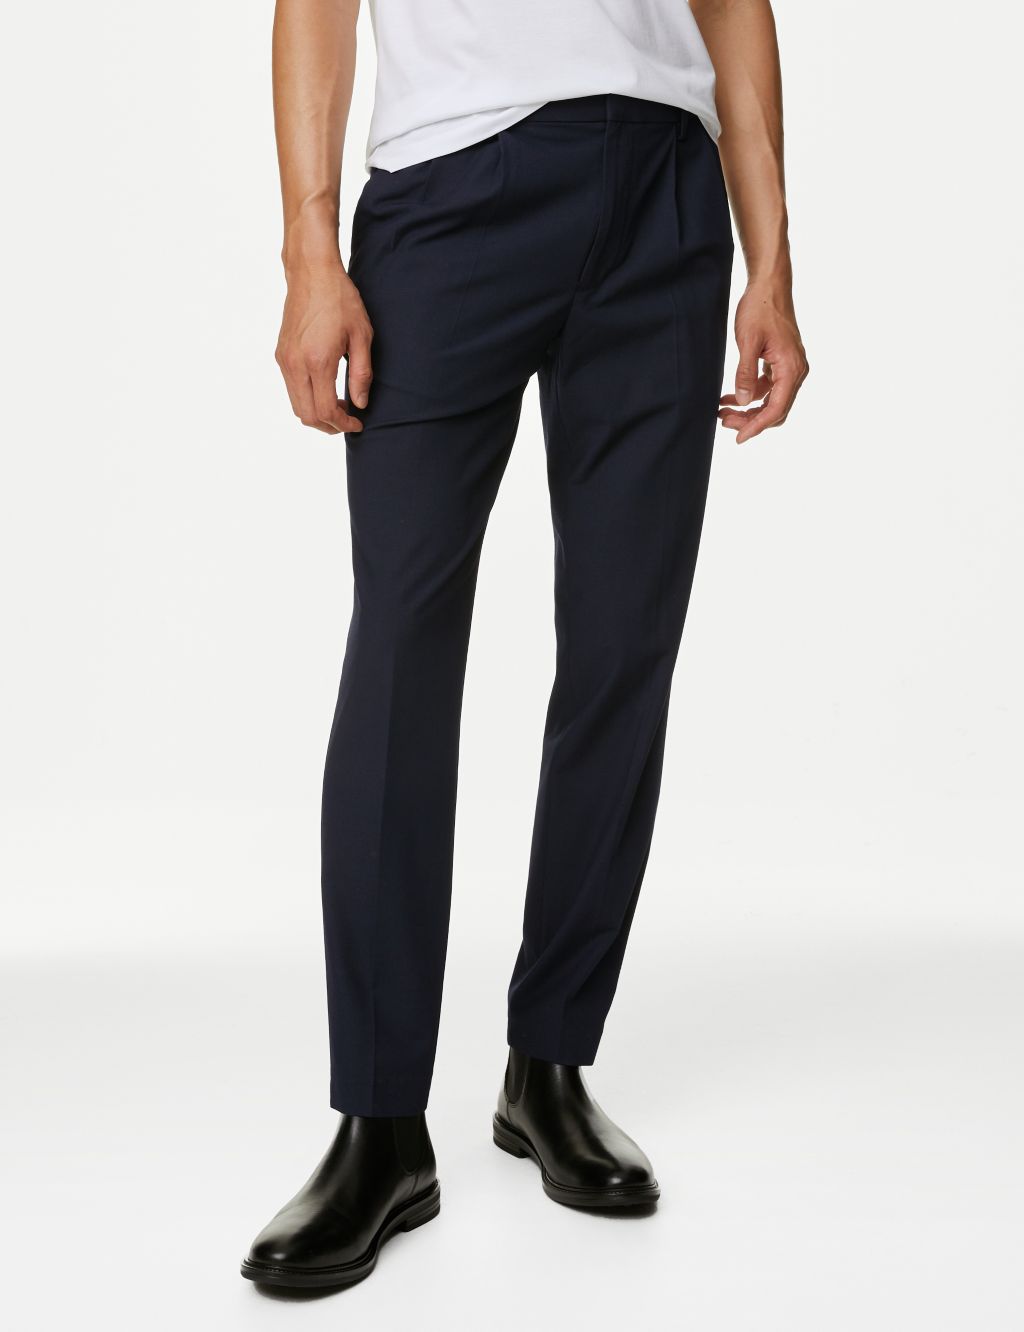 Twin Pleat Stretch Trousers image 3